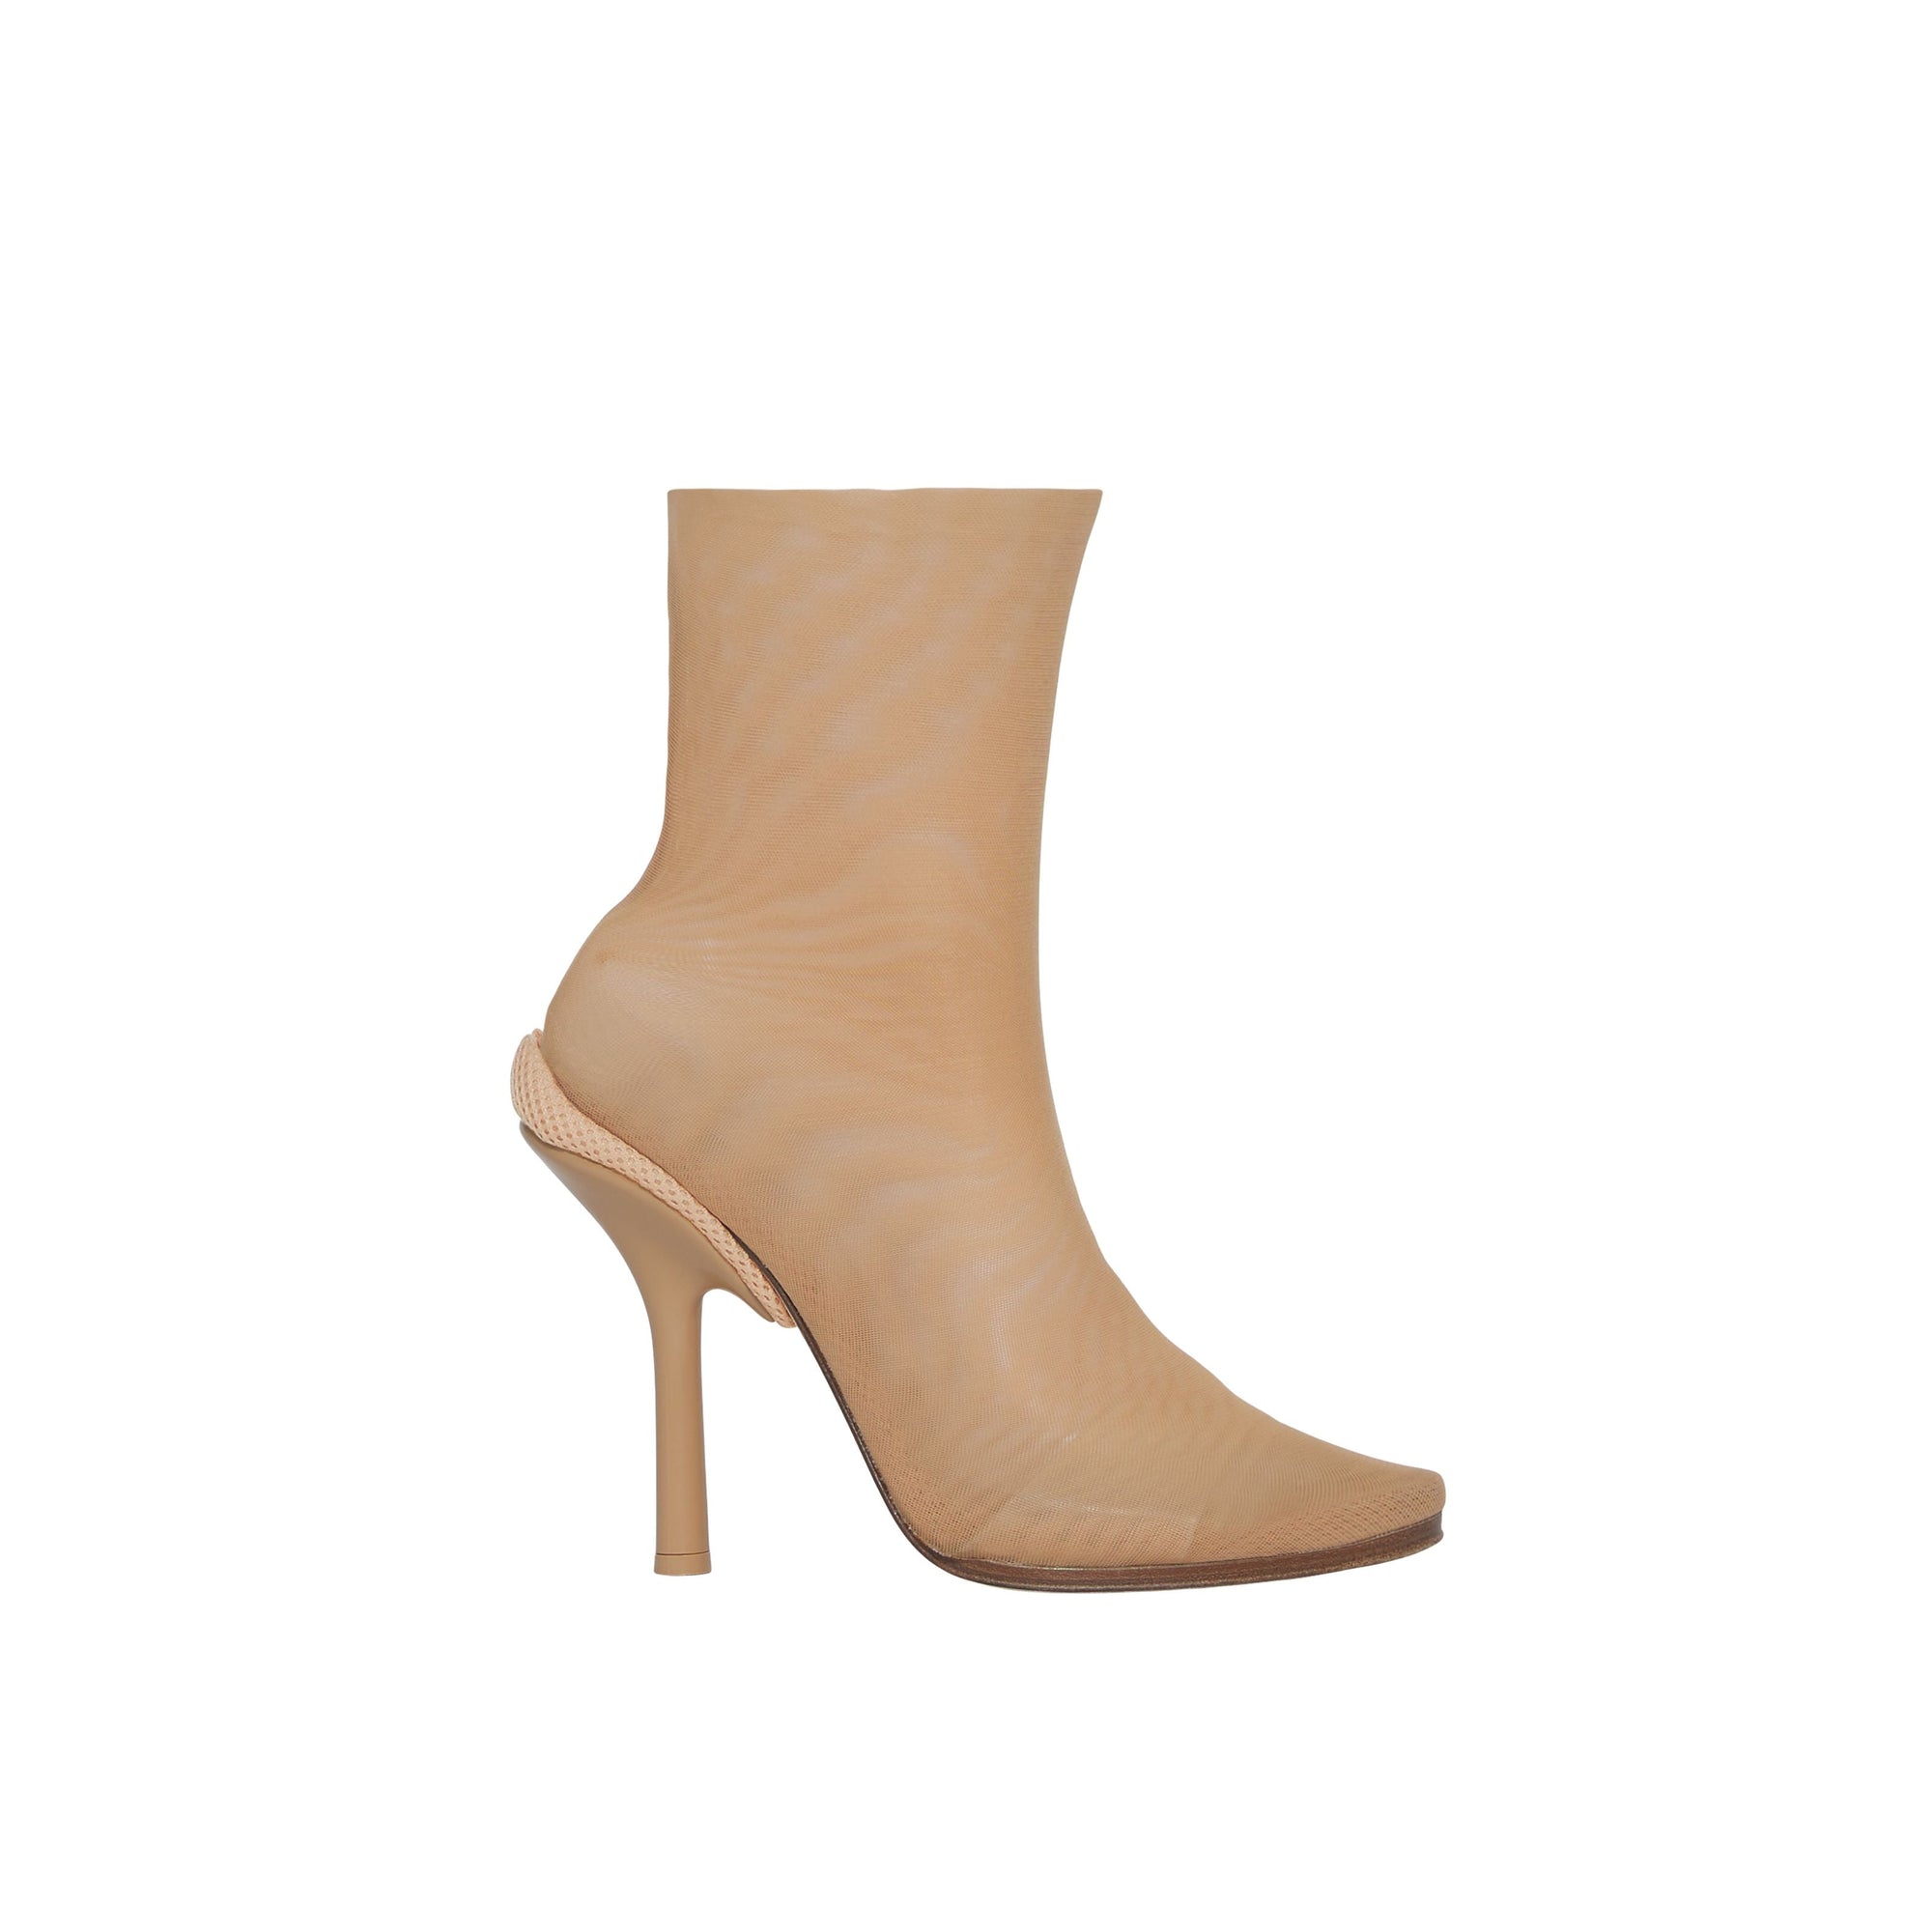 BEIGE Accessories W ANKLE BOOT